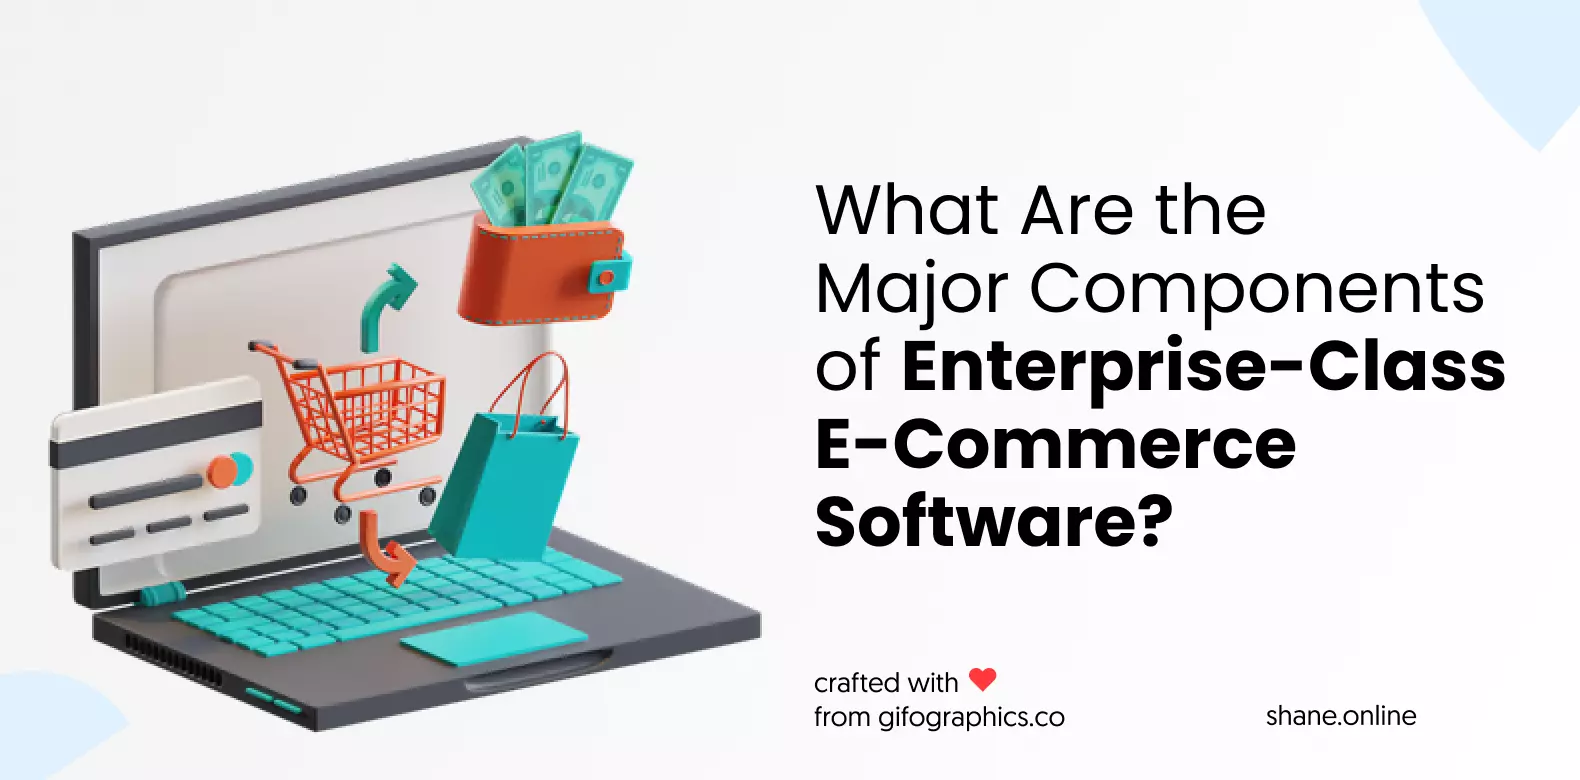 What Are the Major Components of Enterprise-Class E-Commerce Software?